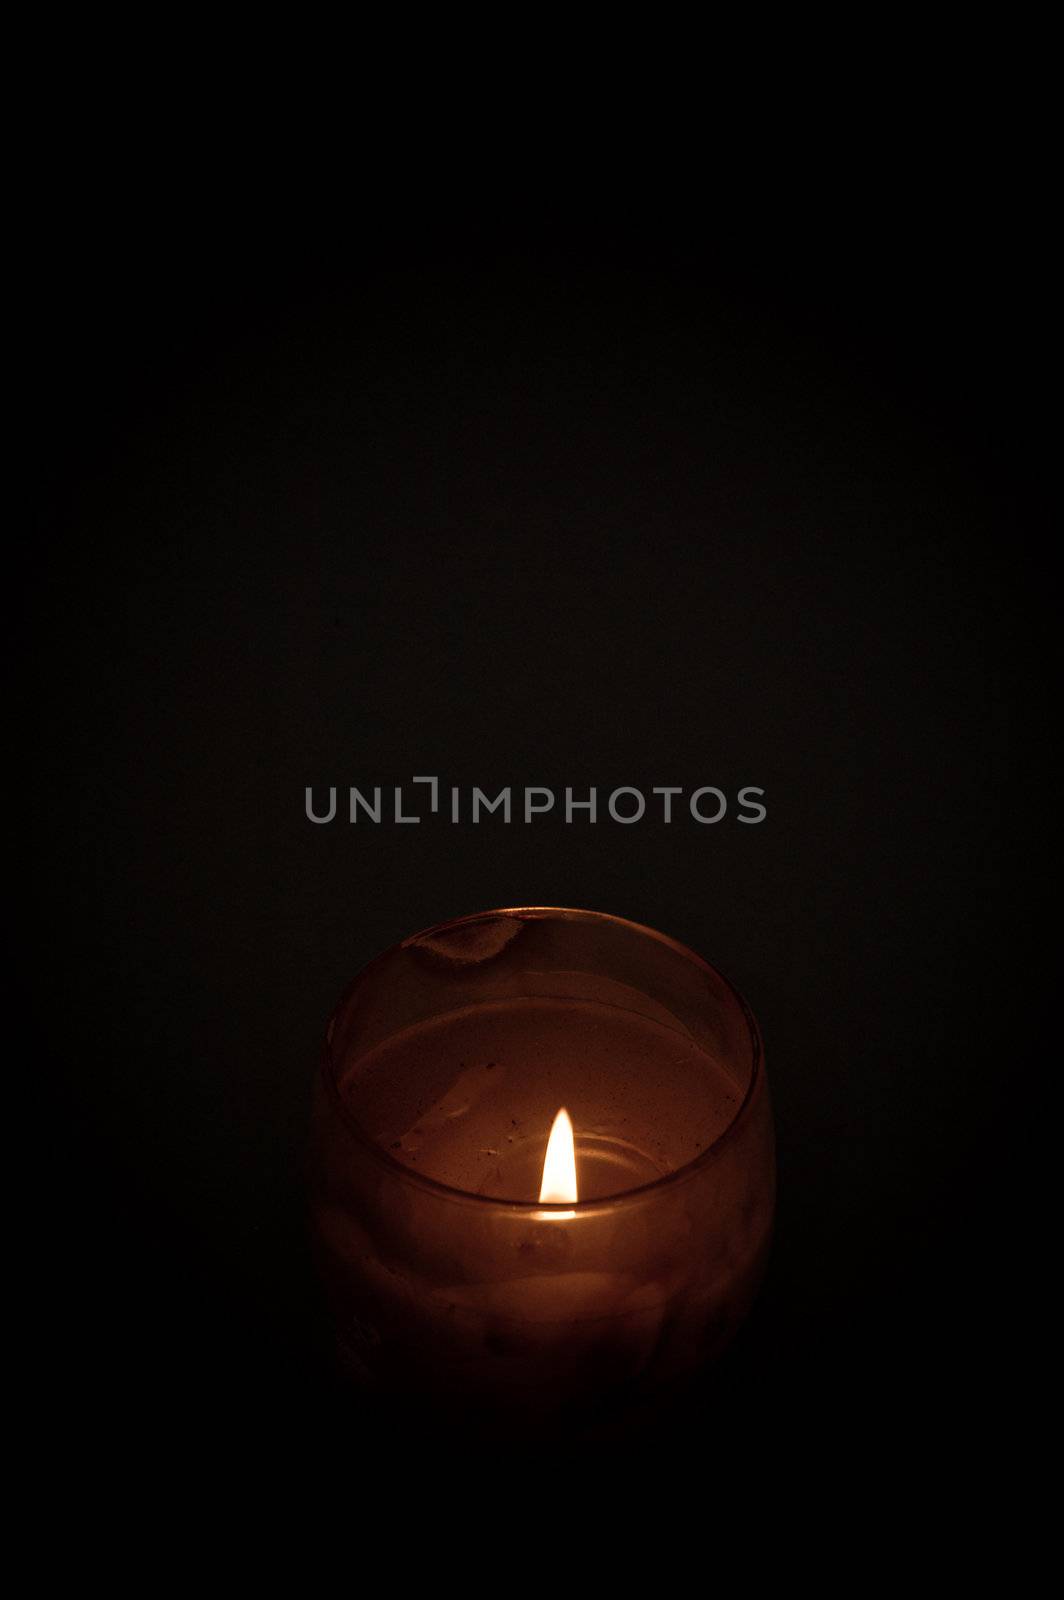 A candle providing light to brighten darkness